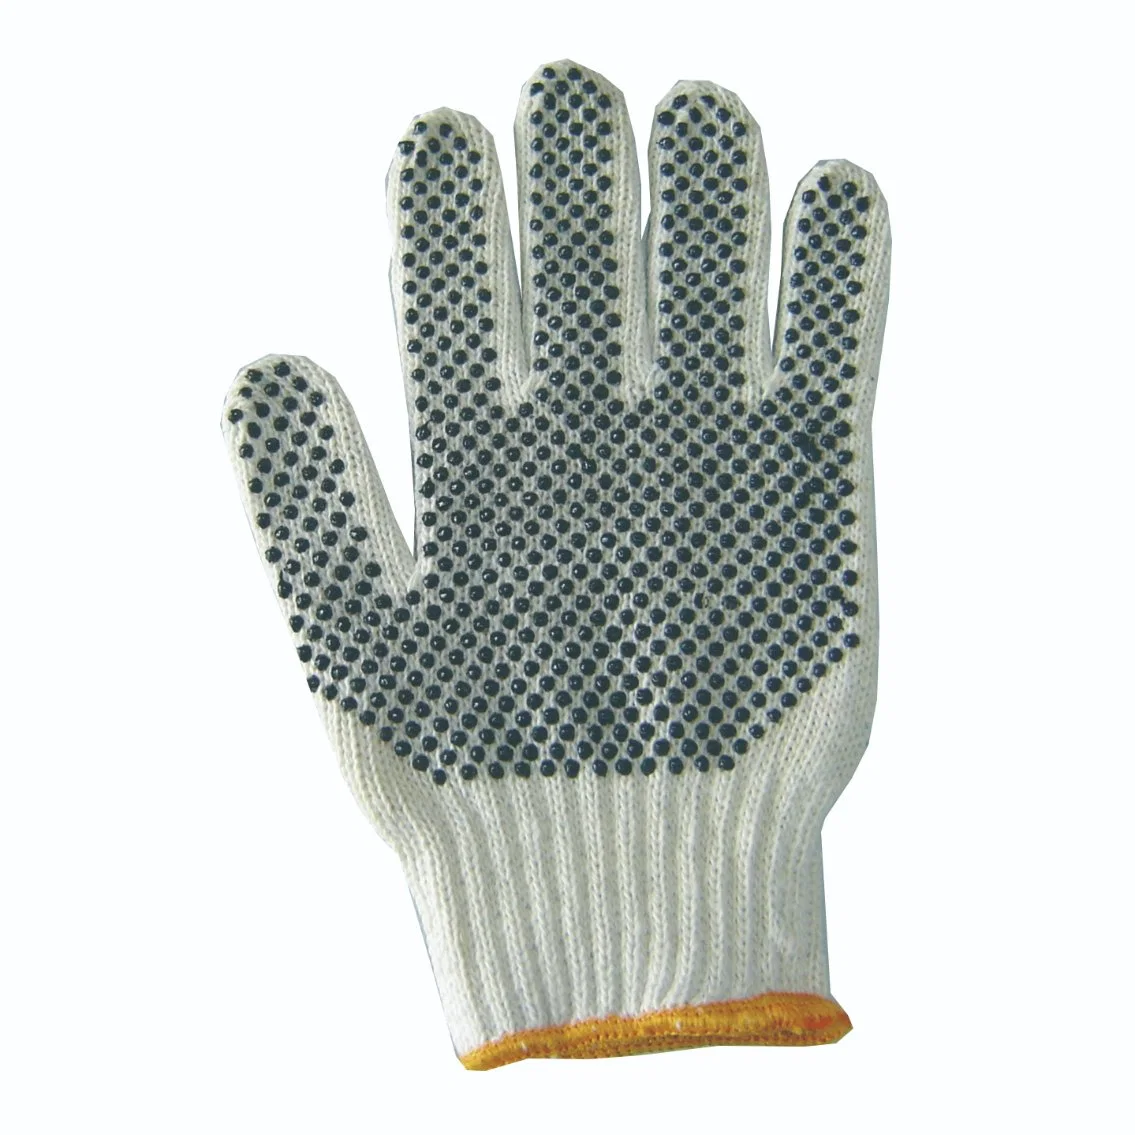 Slg-8003 T/C Yarn Gloves Cotton Gloves Dotted White Cotton with Dots Gloves